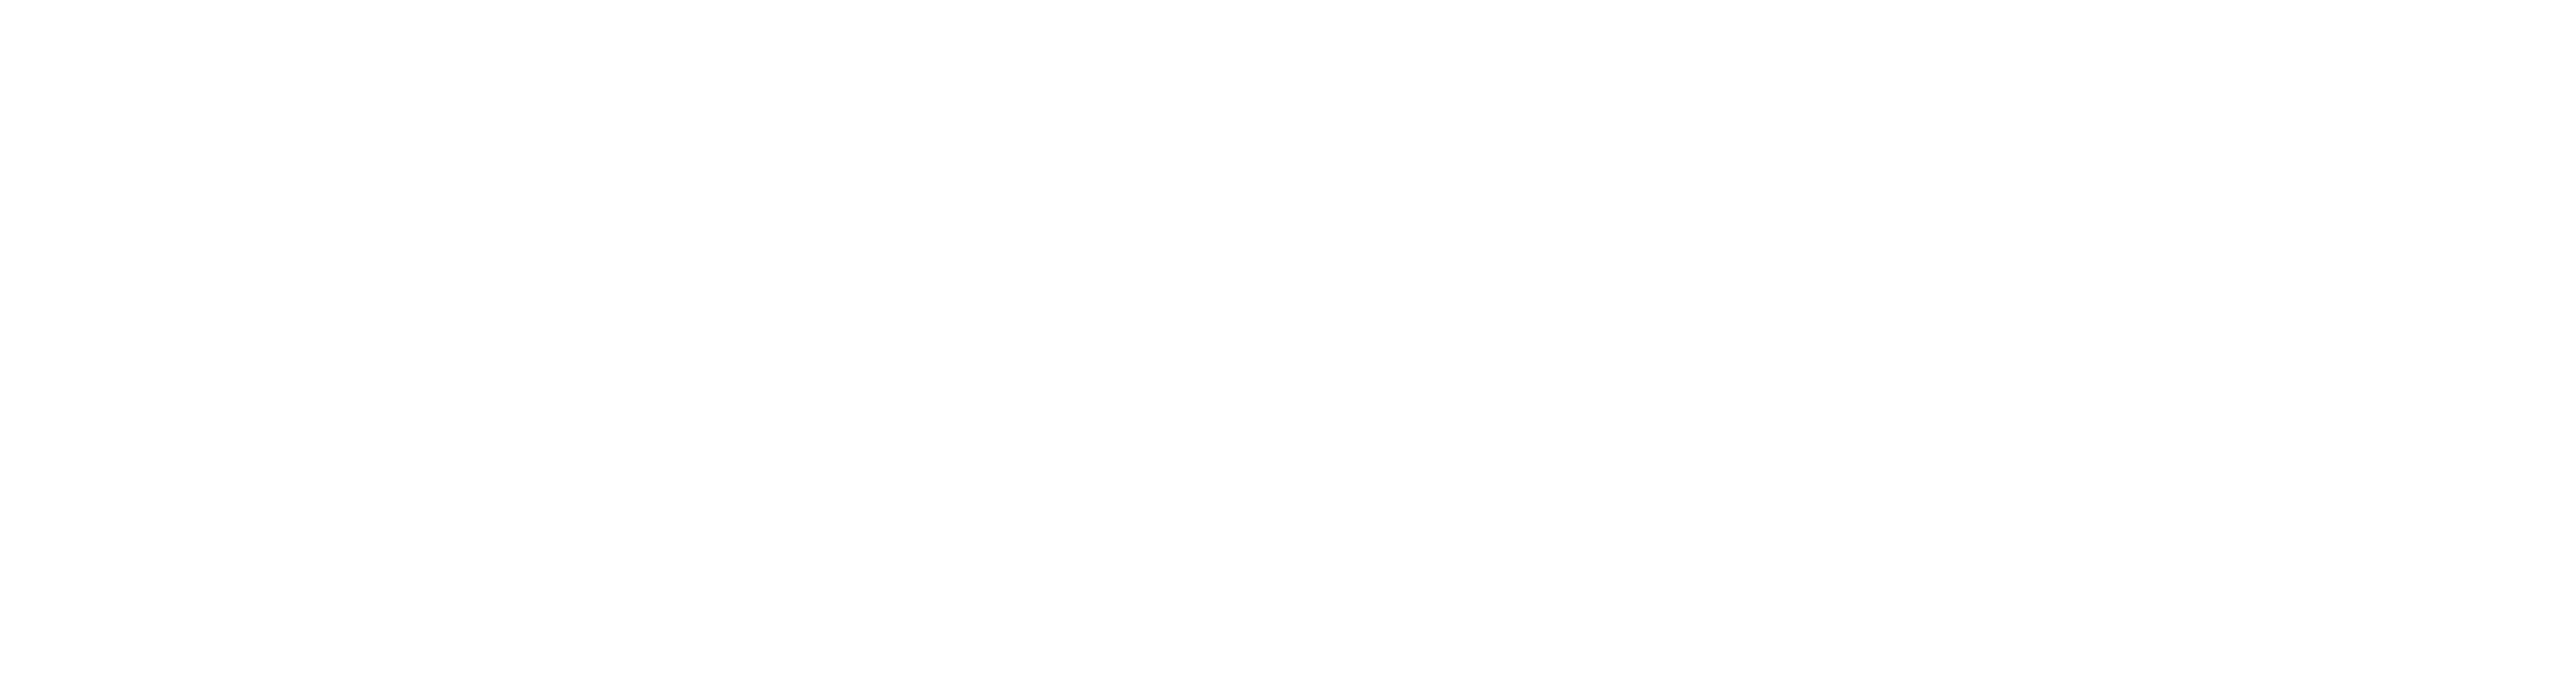 The Military Report